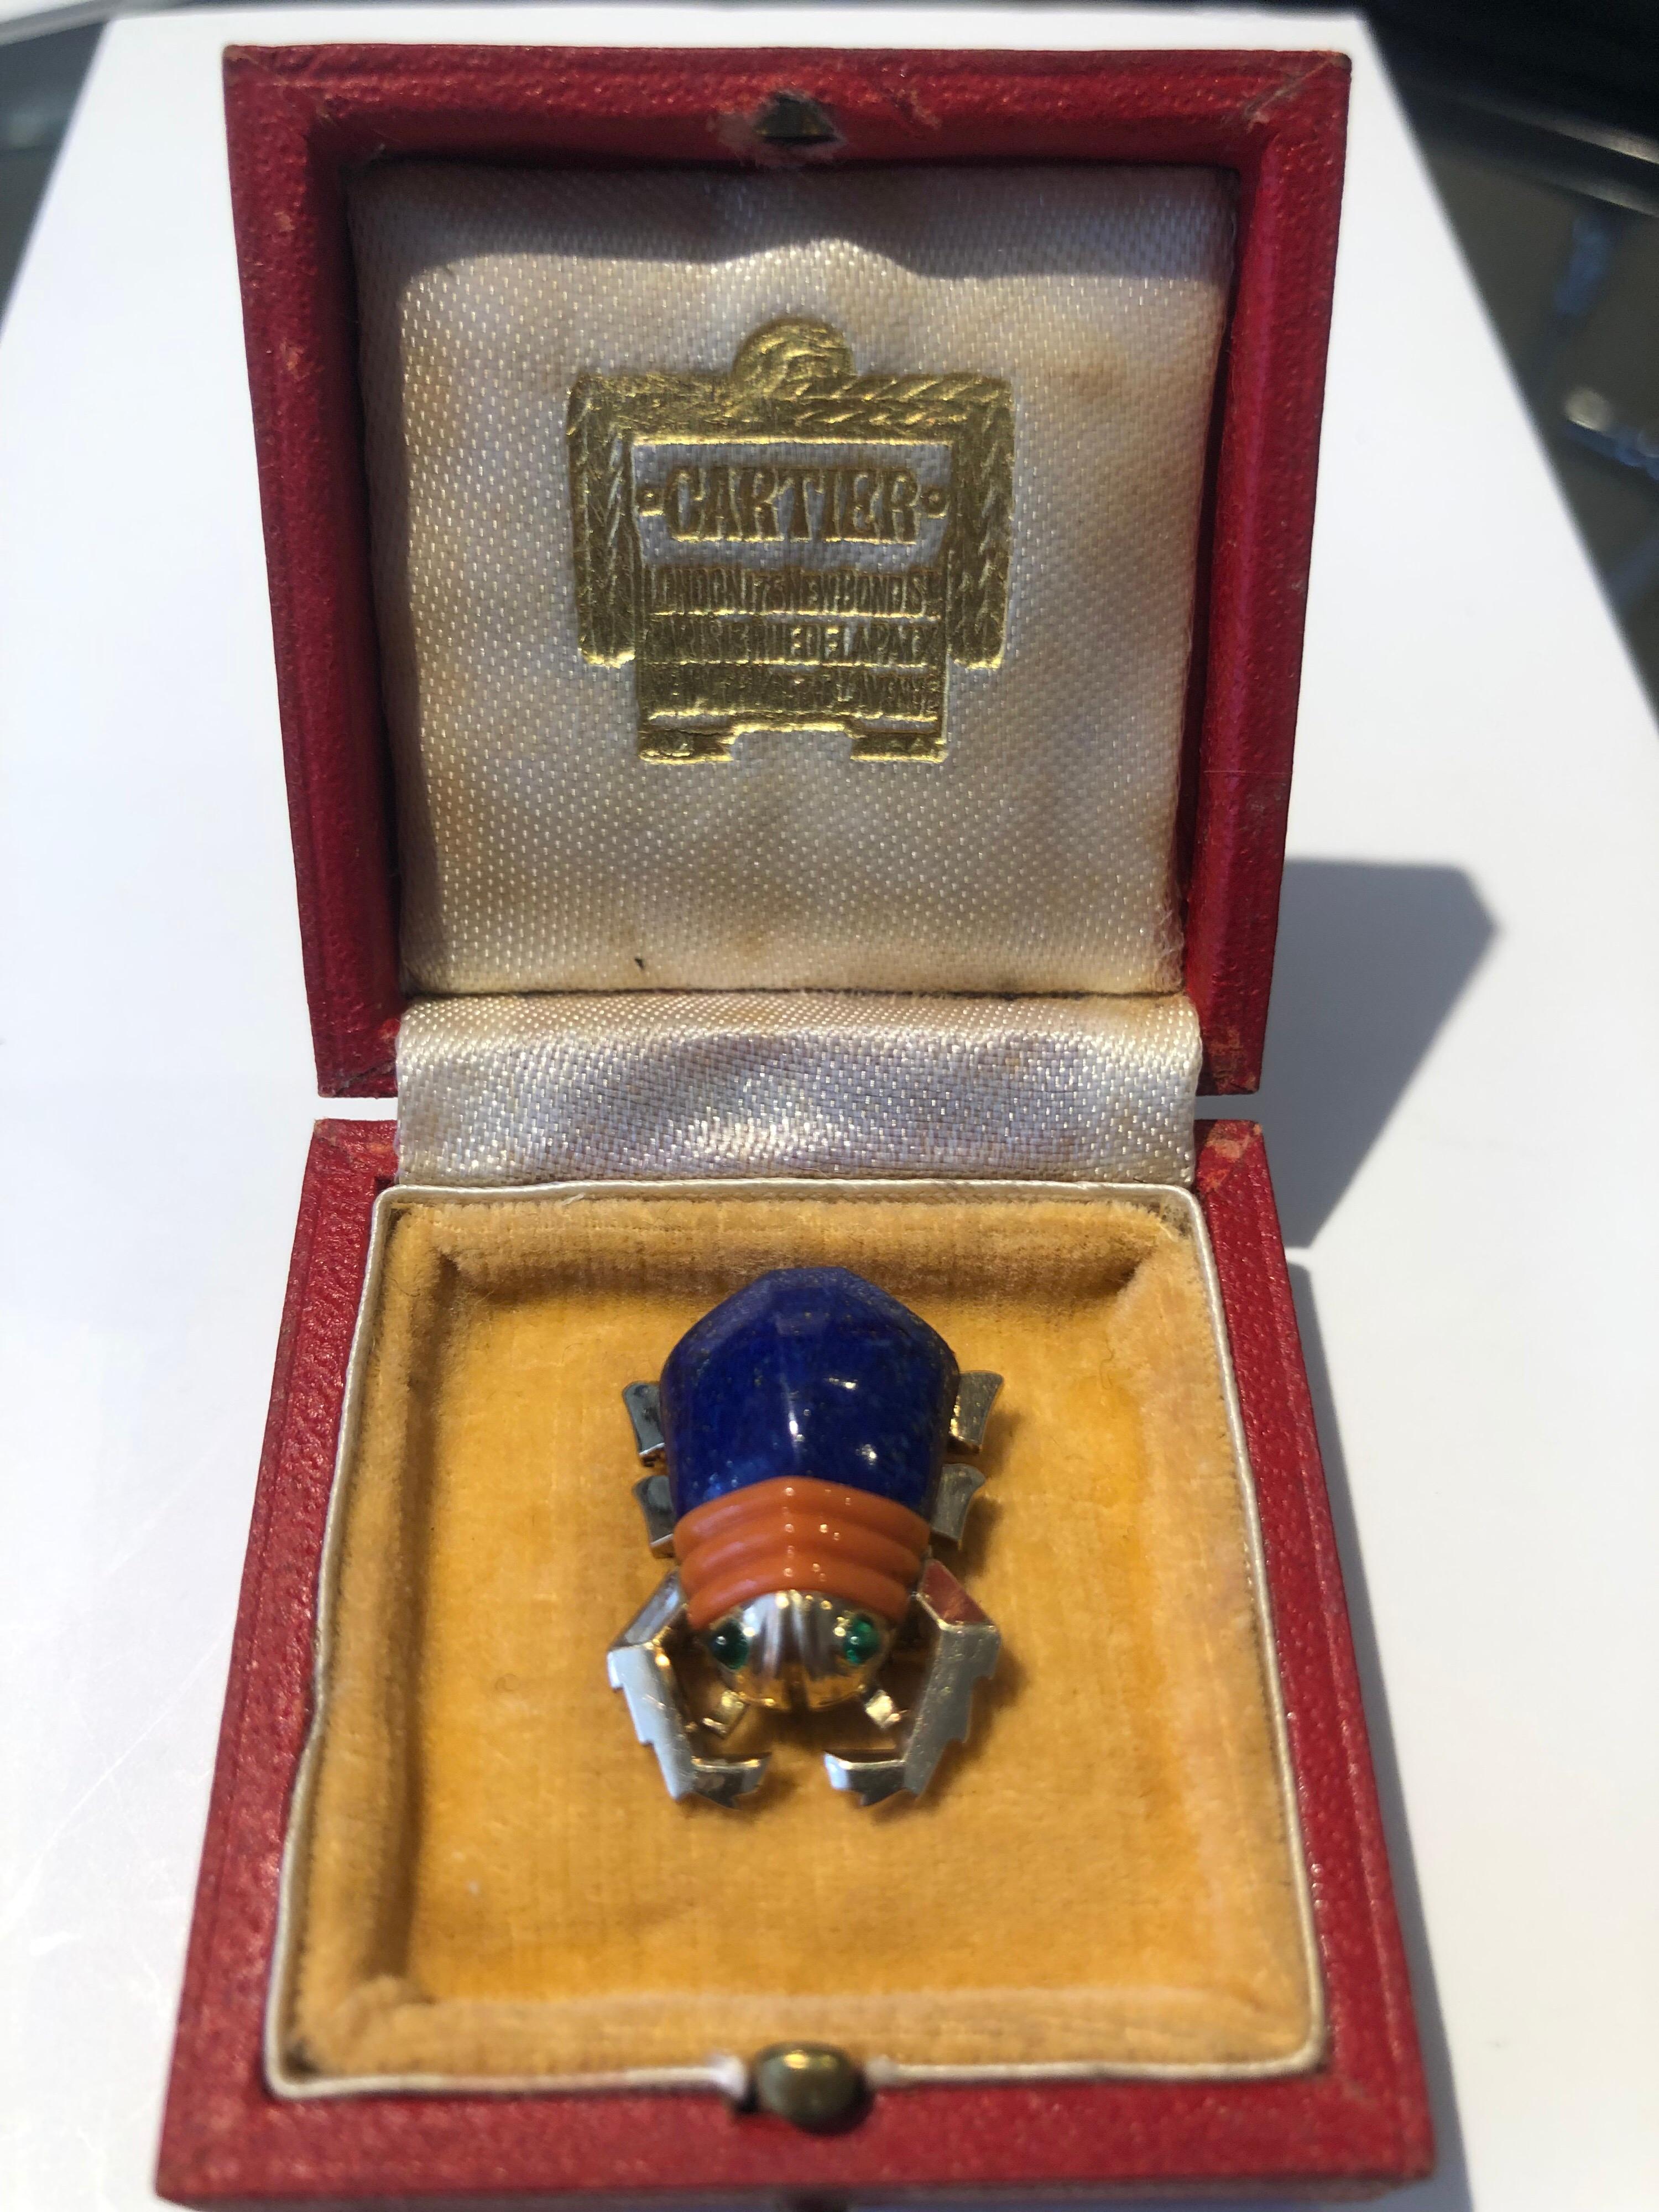 A 1950’s Cartier Lapis Lazuli and Coral Beetle Brooch. This rare and charming brooch has a Lapis Lazuli and carved Coral body and eyes which are set with small cabochon emeralds.
The brooch is signed Cartier London and numbered 4390
The brooch